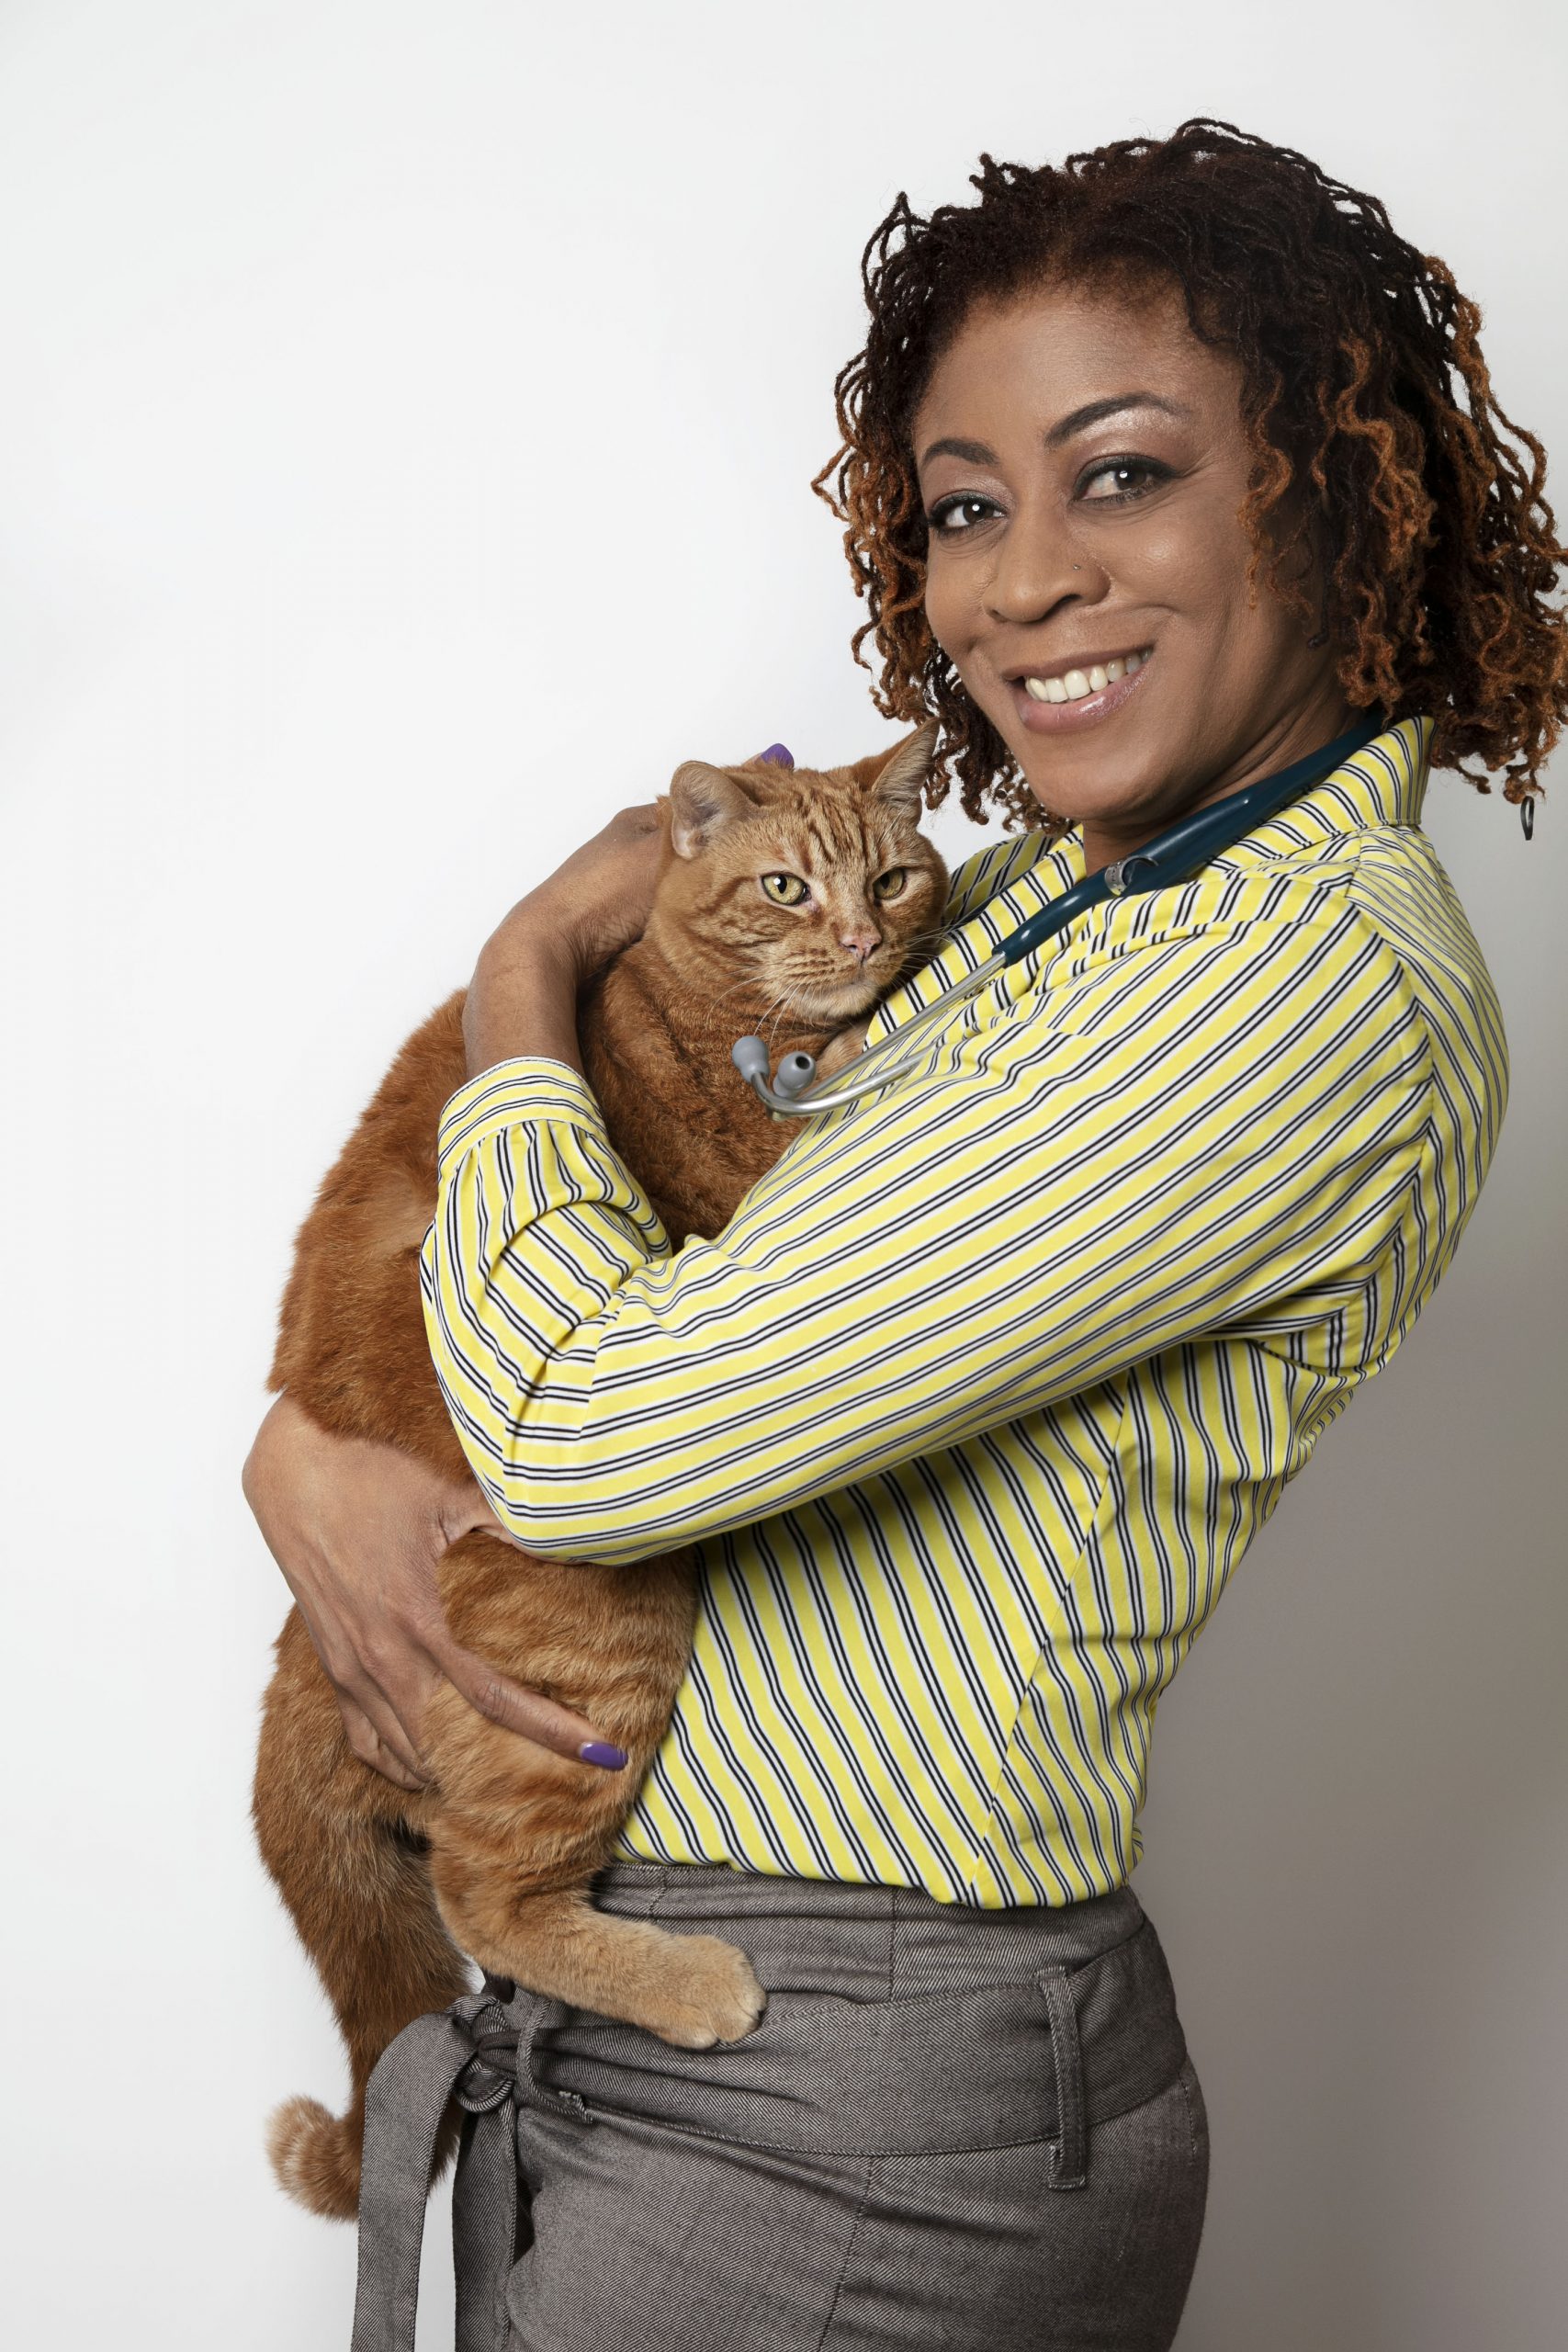 Image of Dr. Brown holding an orange cat